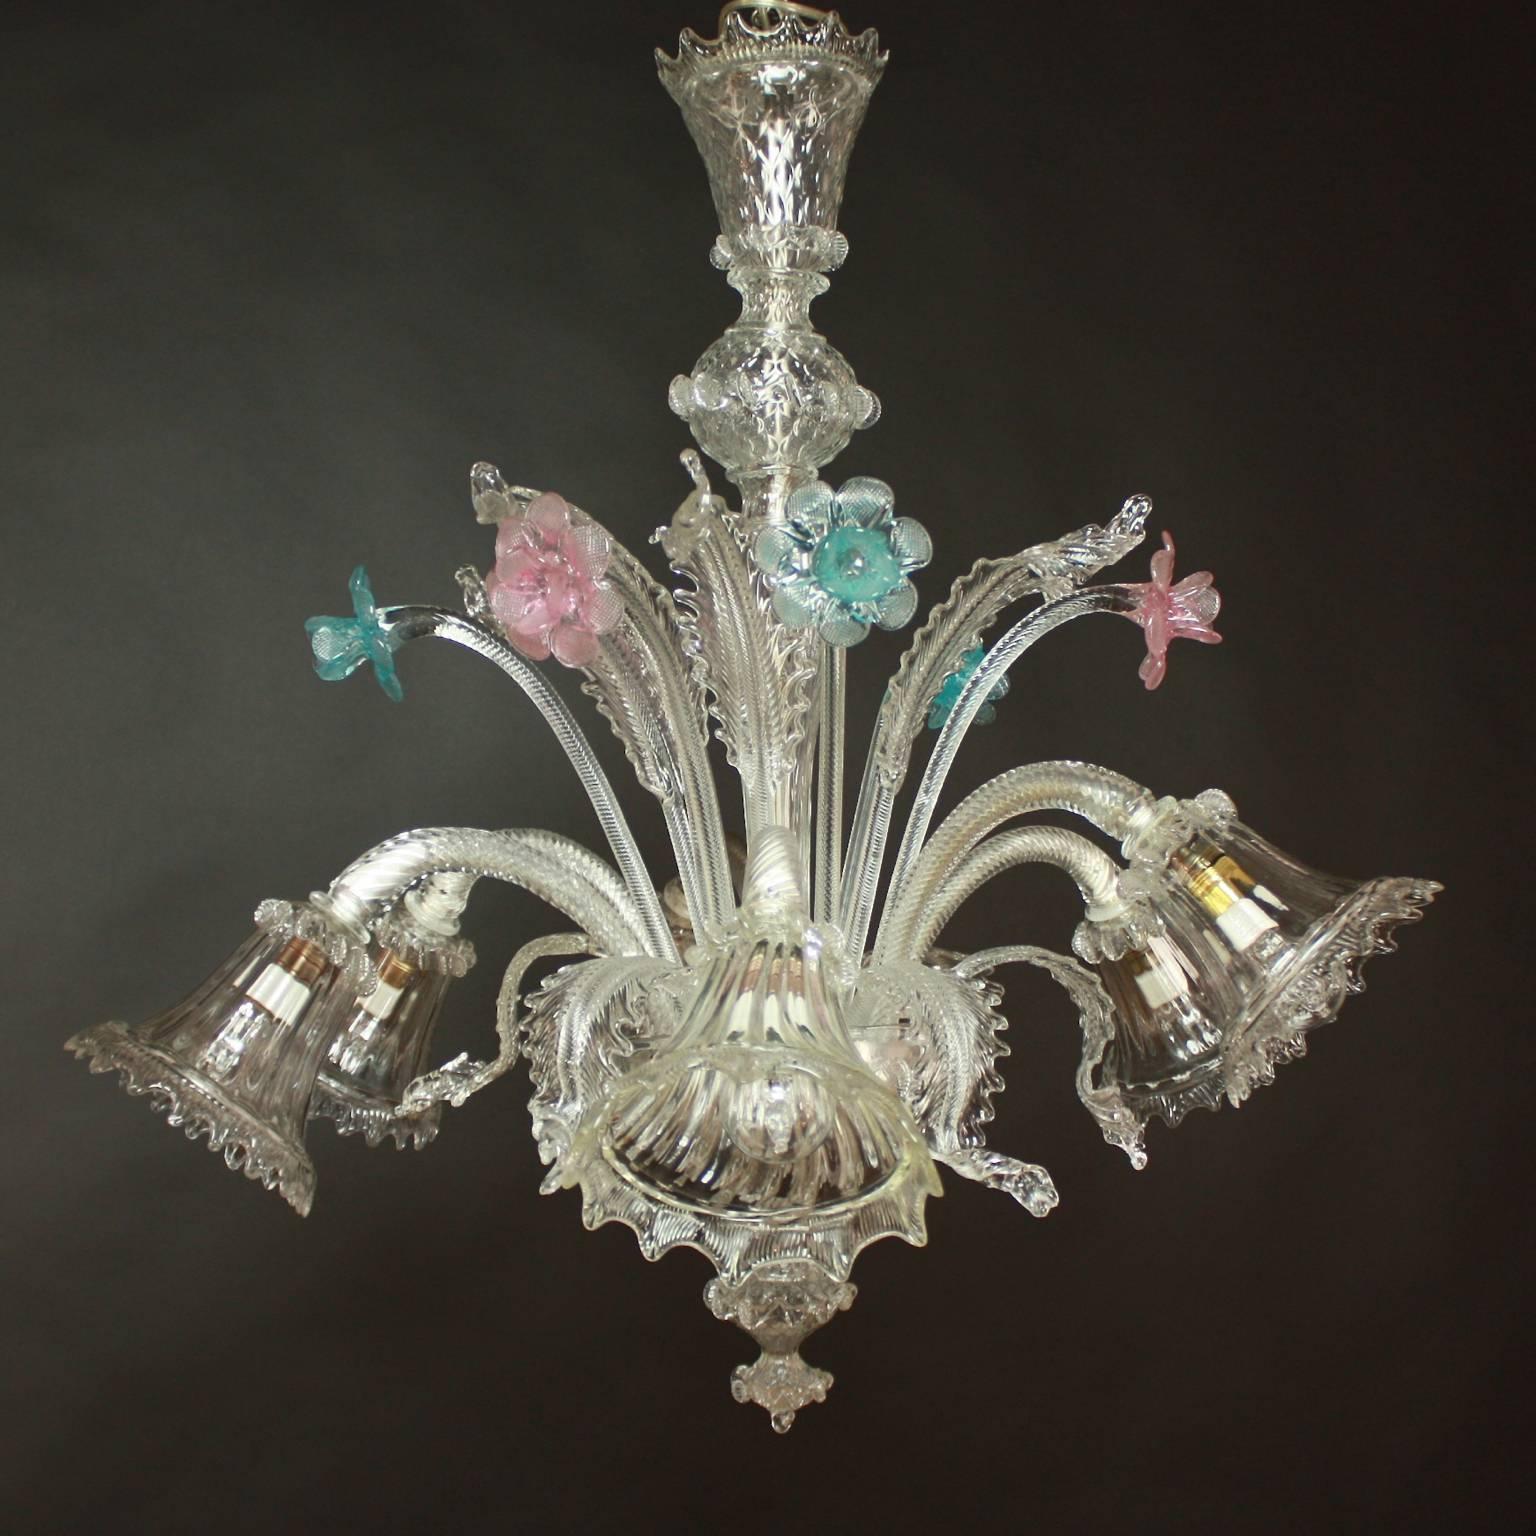 A small and elegant Murano six-light chandelier in transparent colors with sophisticated finishes in pink and light blue. With a centred bulbous column issuing branches and delicately cut Murano glass flowers and leaves. 

Ca'Rezzonico is the name